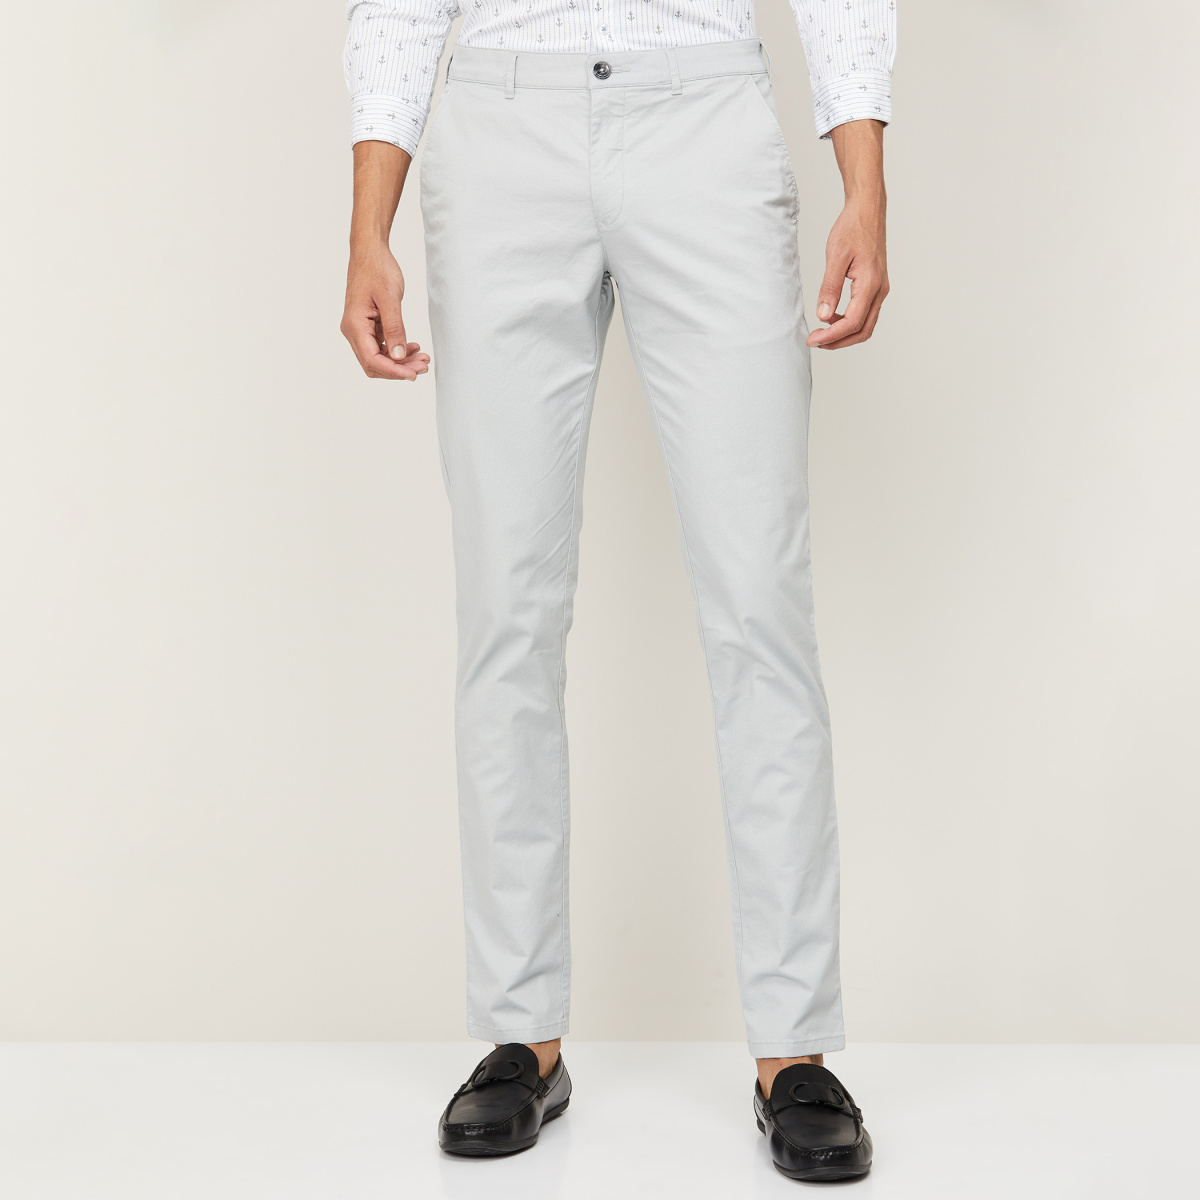 Buy ColorPlus Formal Trousers online - Men - 25 products | FASHIOLA.in-totobed.com.vn